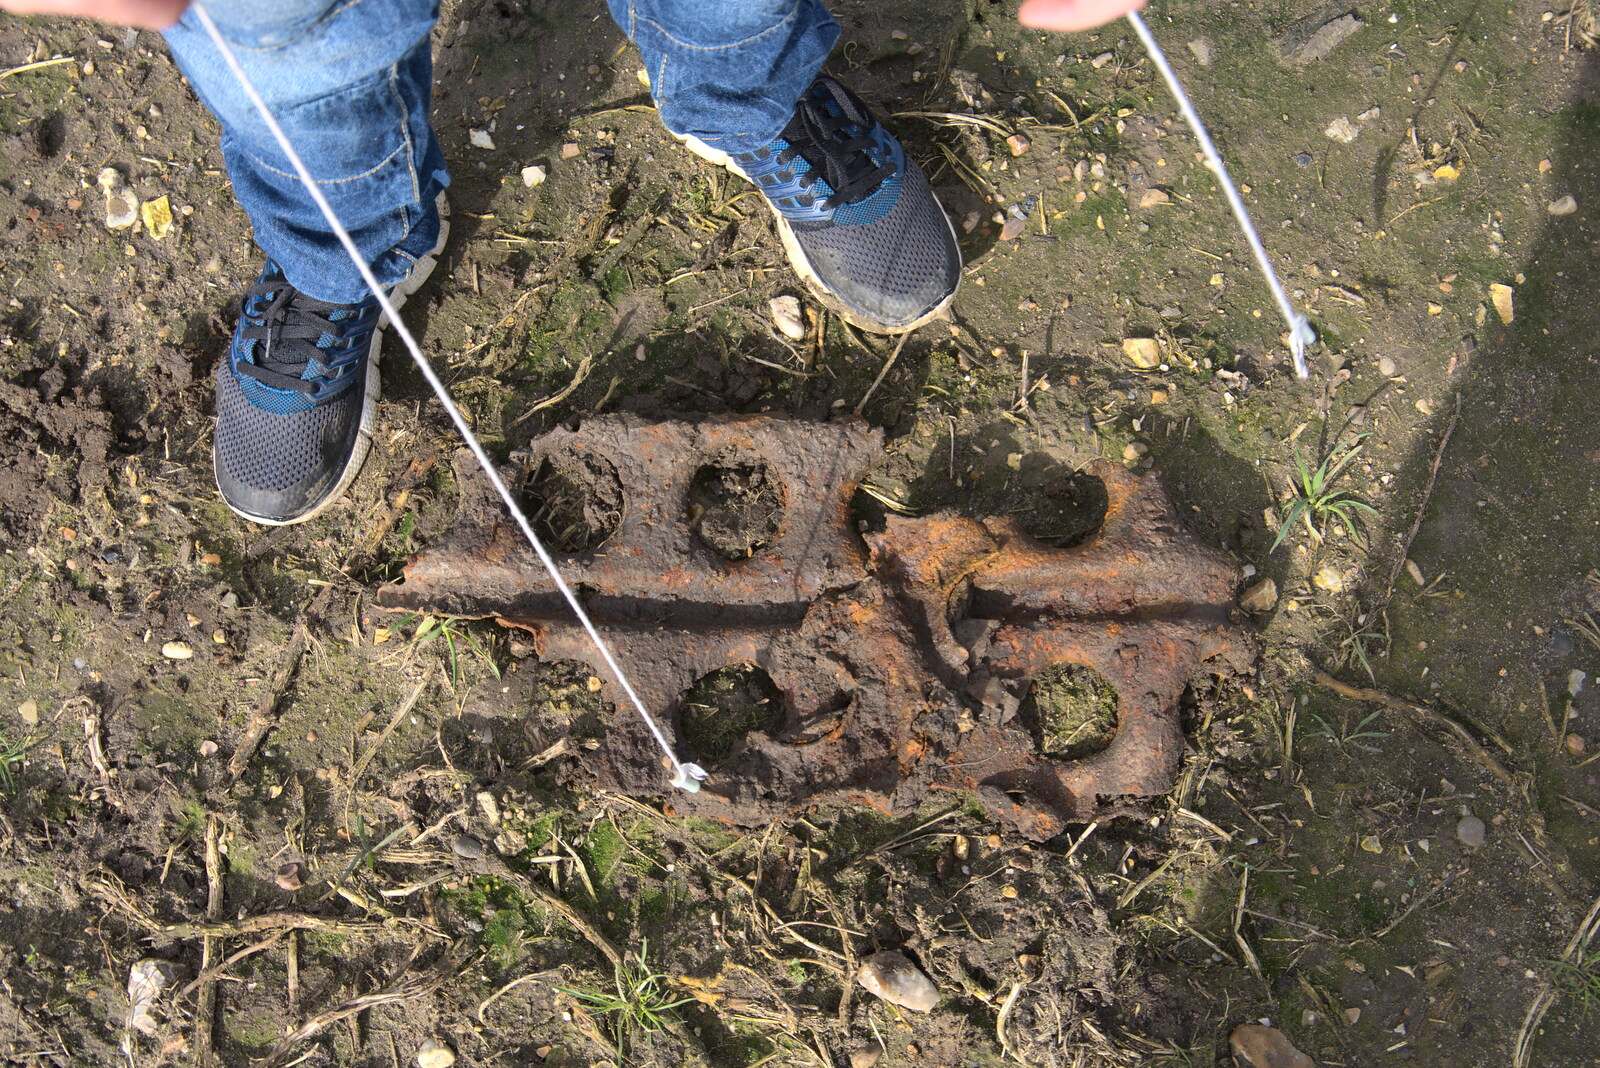 Fred finds some more old metal from Another Walk on Eye Airfield, Eye, Suffolk - 14th March 2021